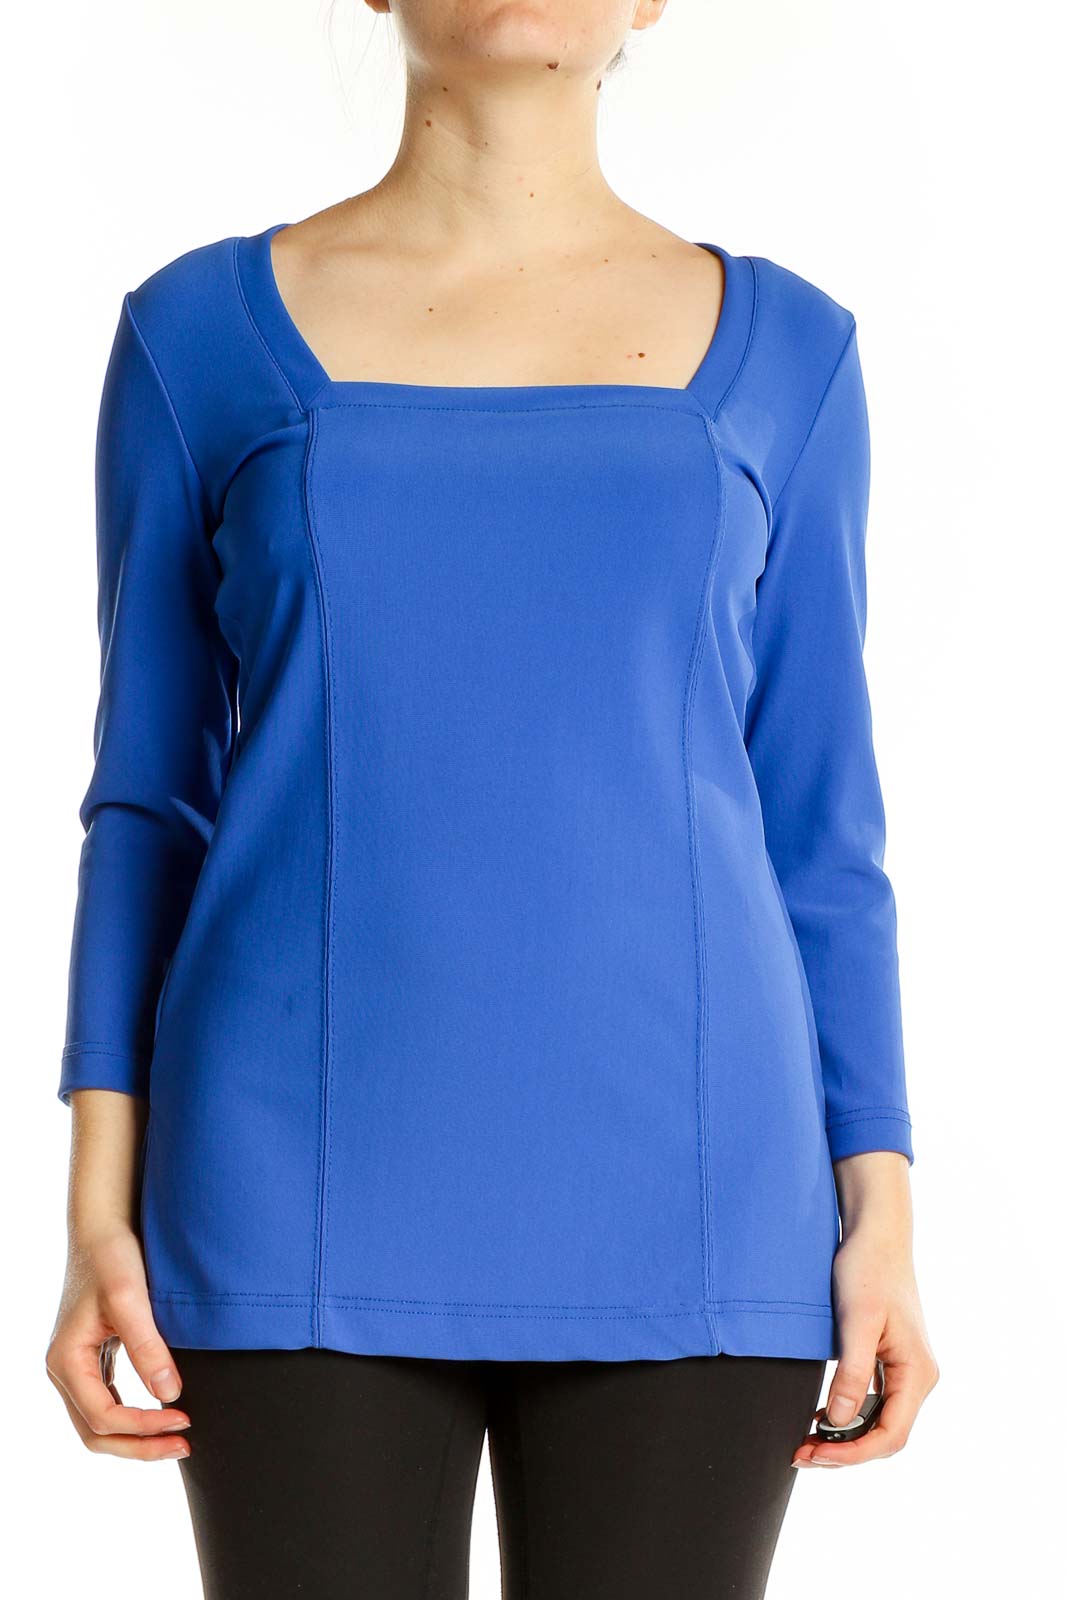 Blue Square Neck Tunic Top Front